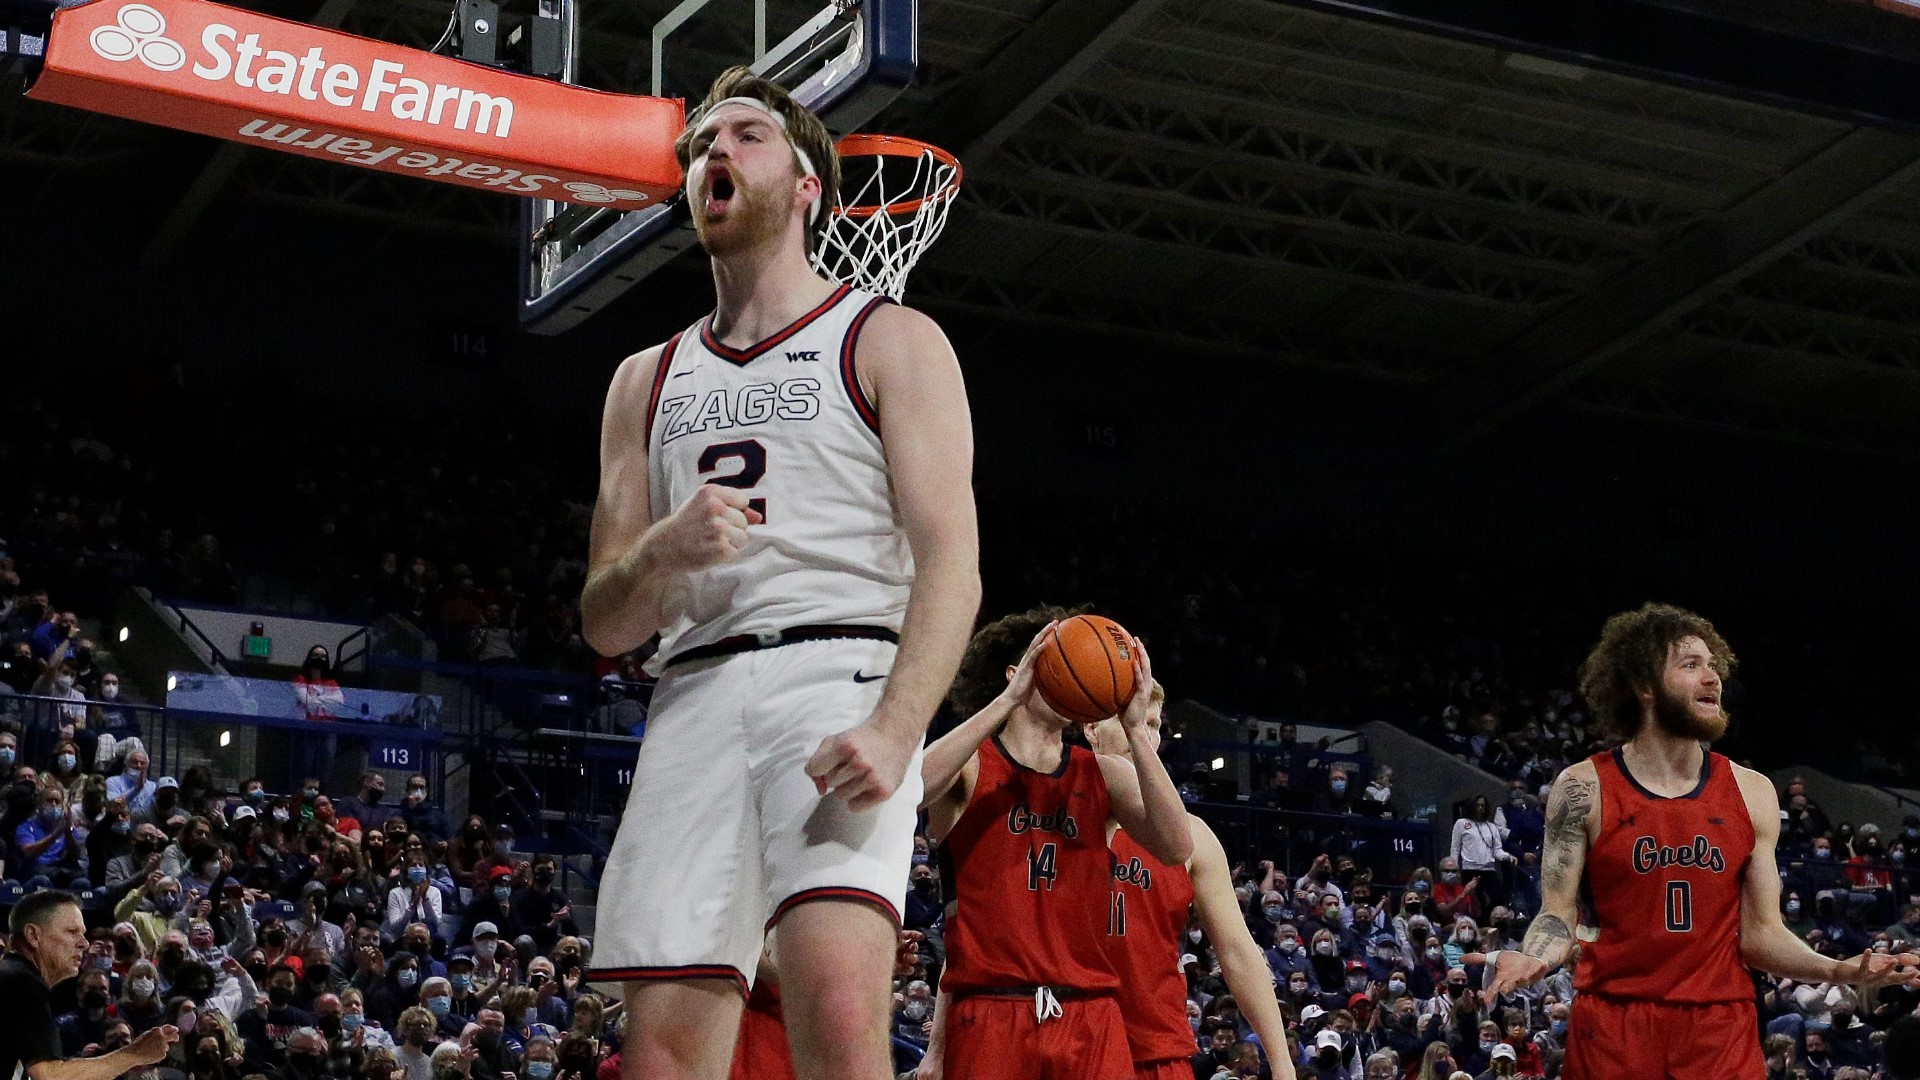 Gonzaga vs Saint Mary’s How to watch Tuesday’s basketball game